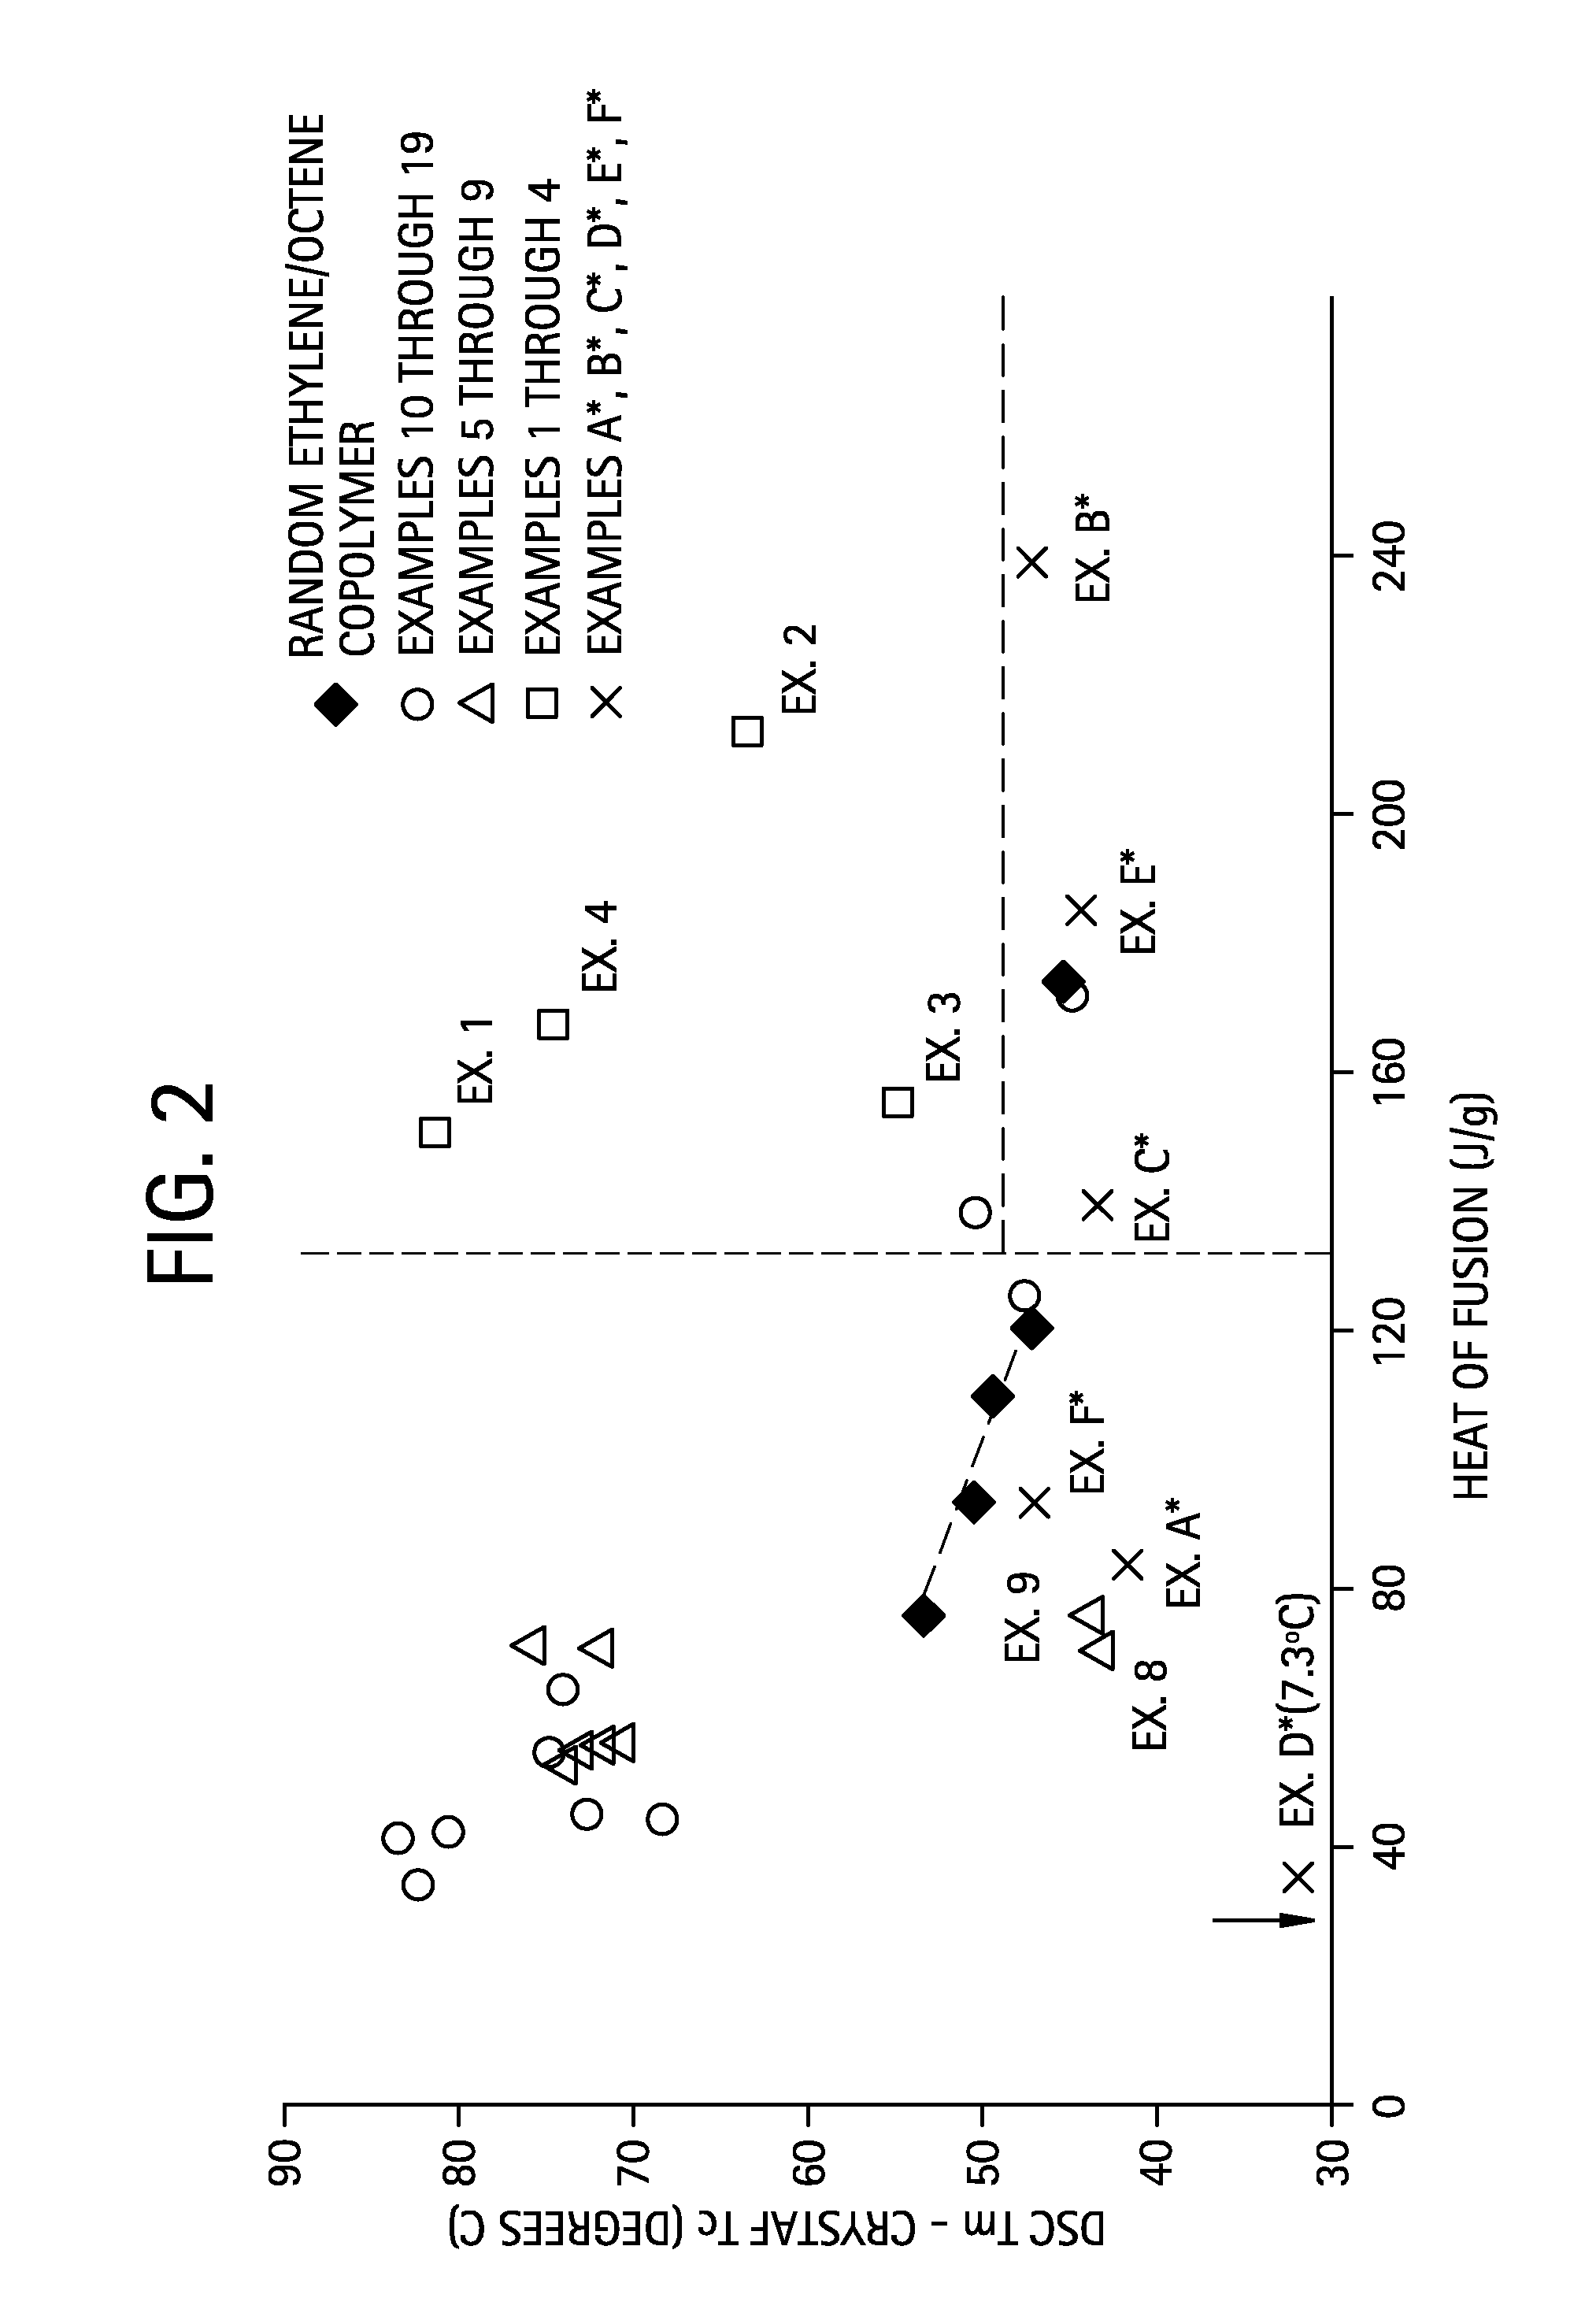 Compositions of ethylene/alpha-olefin multi-block interpolymer for elastic films and laminates